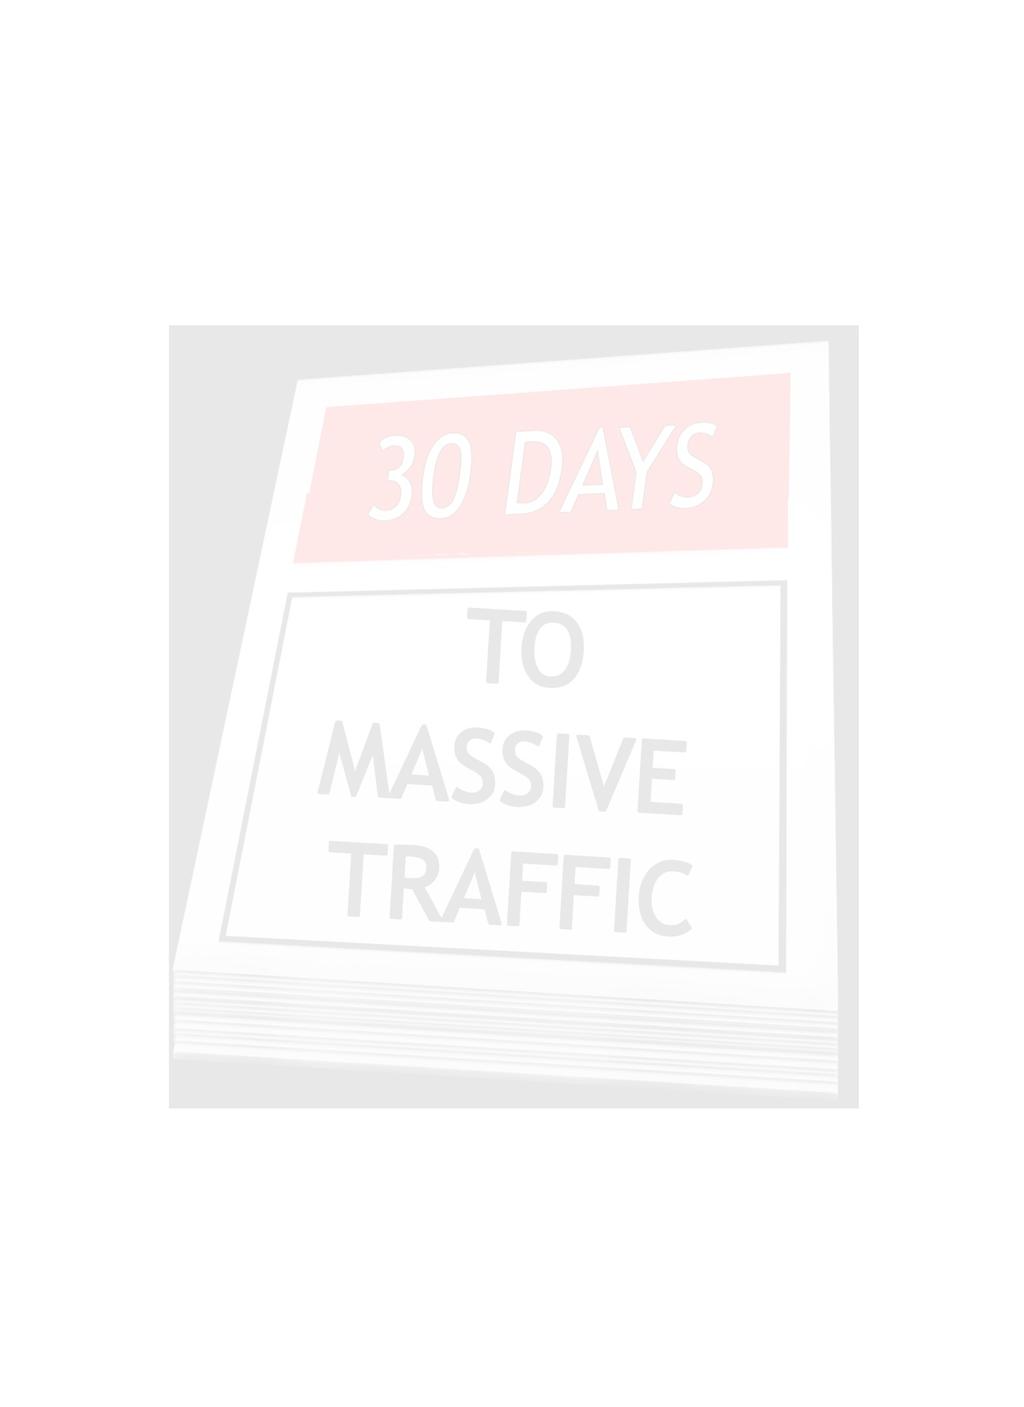 Congratulations. You now have the skills you need to create massive traffic. In just thirty days, you learned the internet marketing tools the marketing giants use.